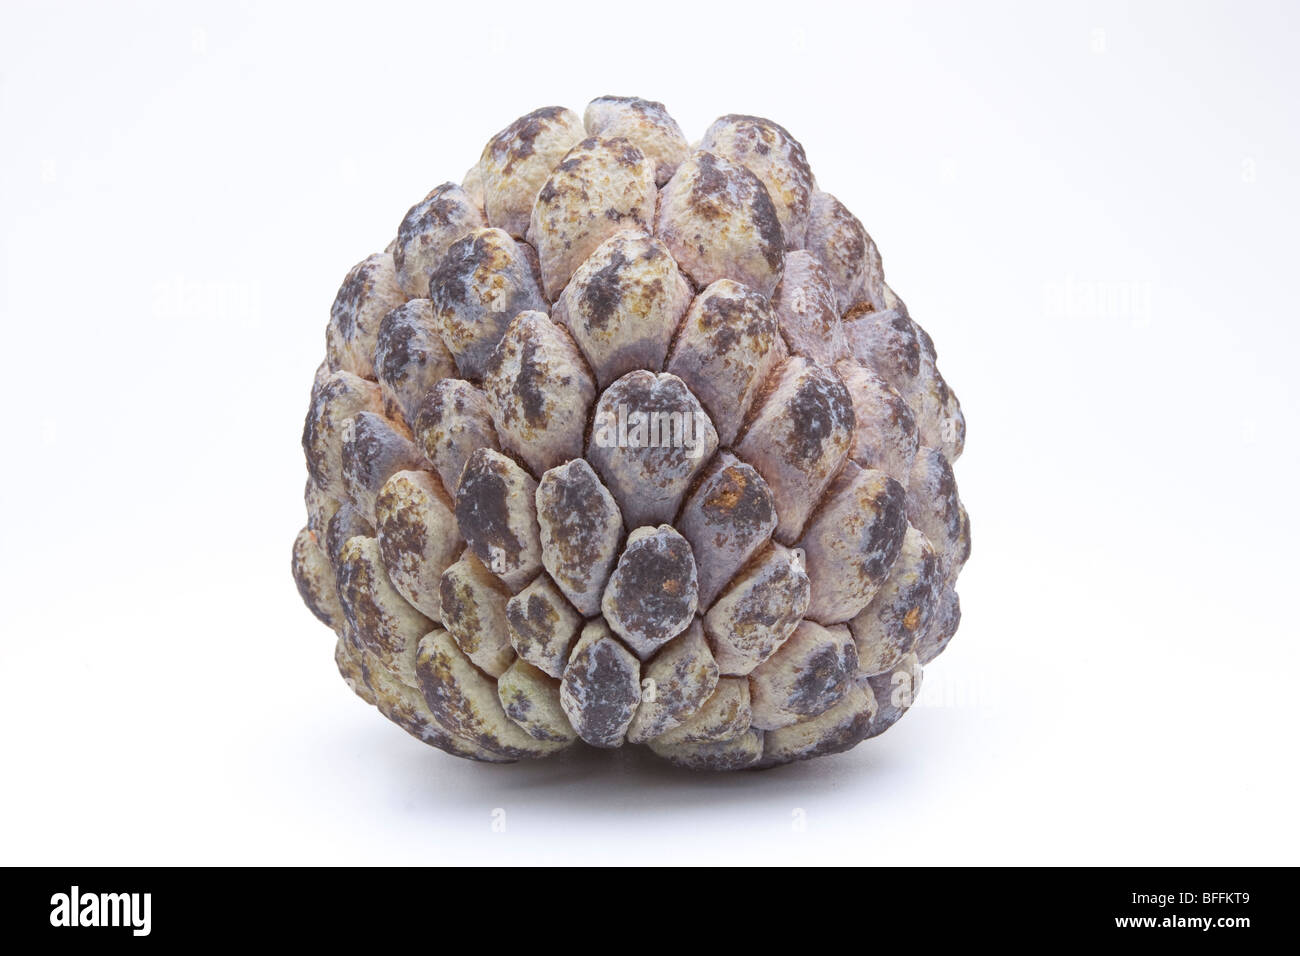 Close up view of a Sugar Apple Fruit isolated against white background. Stock Photo